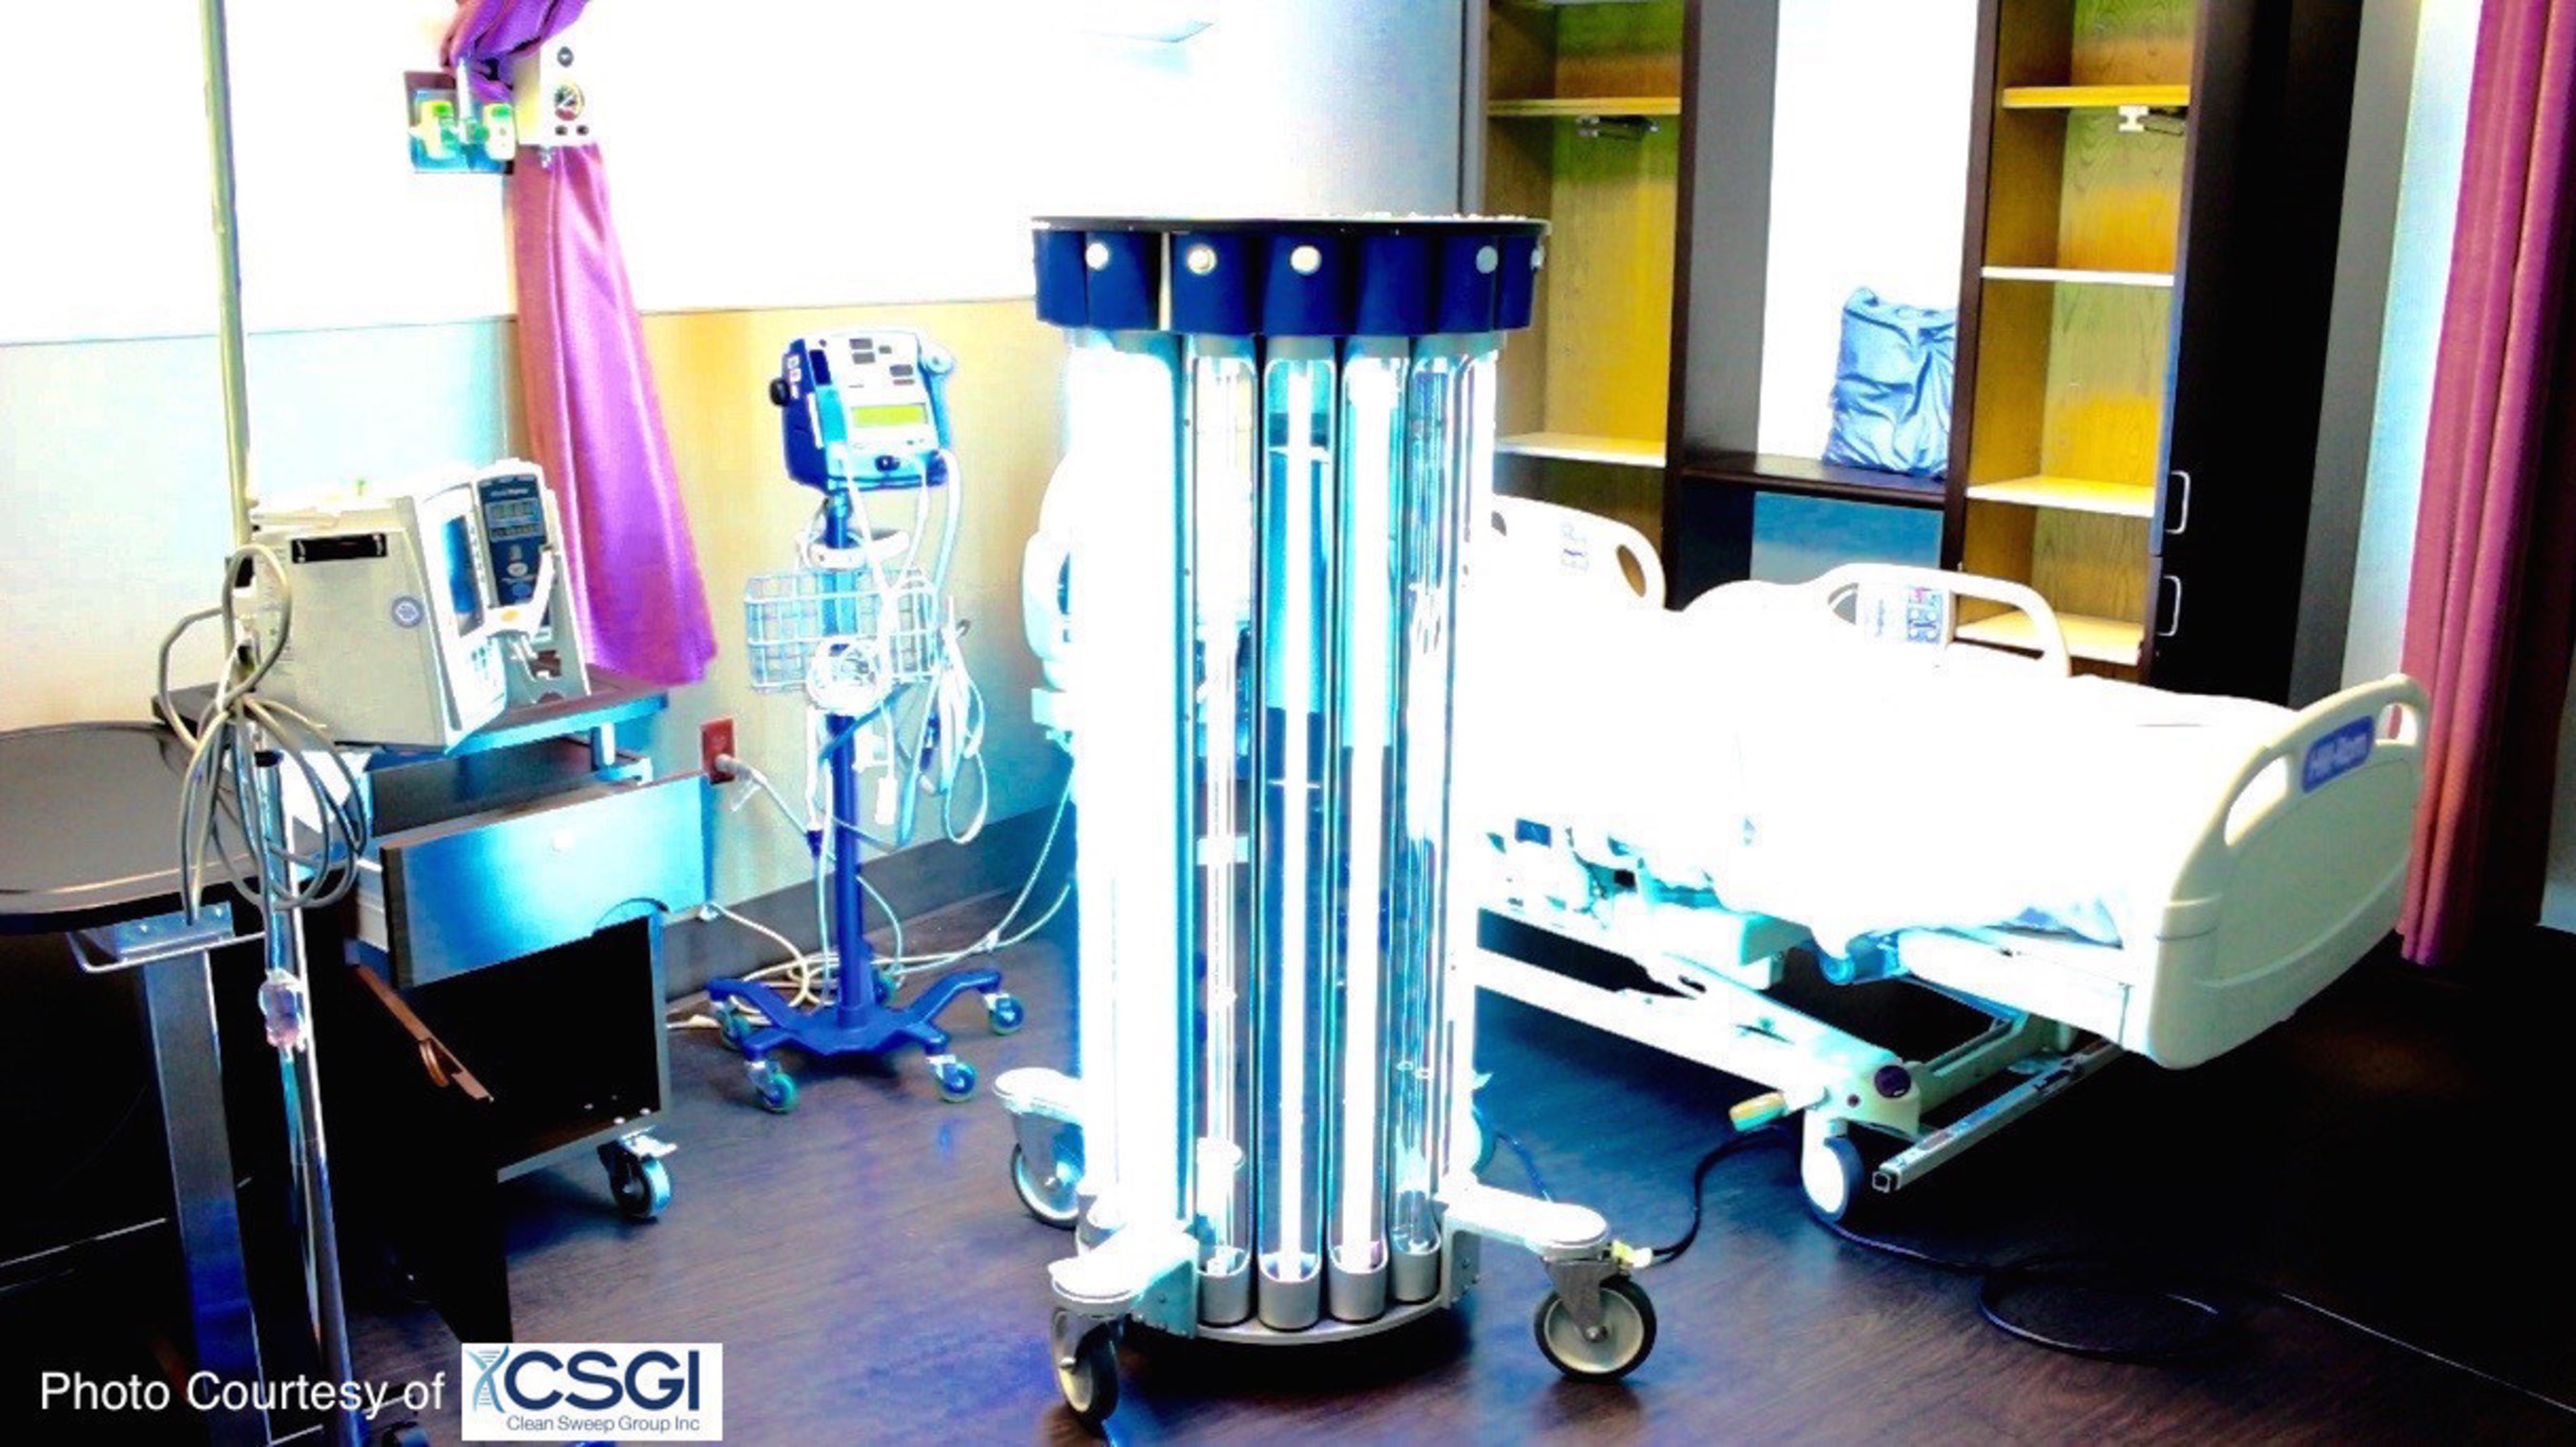 The world's most powerful UV-C emitter at work killing harmful bacteria, viruses and spores in a patient's hospital room.  CSGI's service uses this technology and their proprietary risk management software to make any room 99.9999% "germ free" for the next patient occupant.